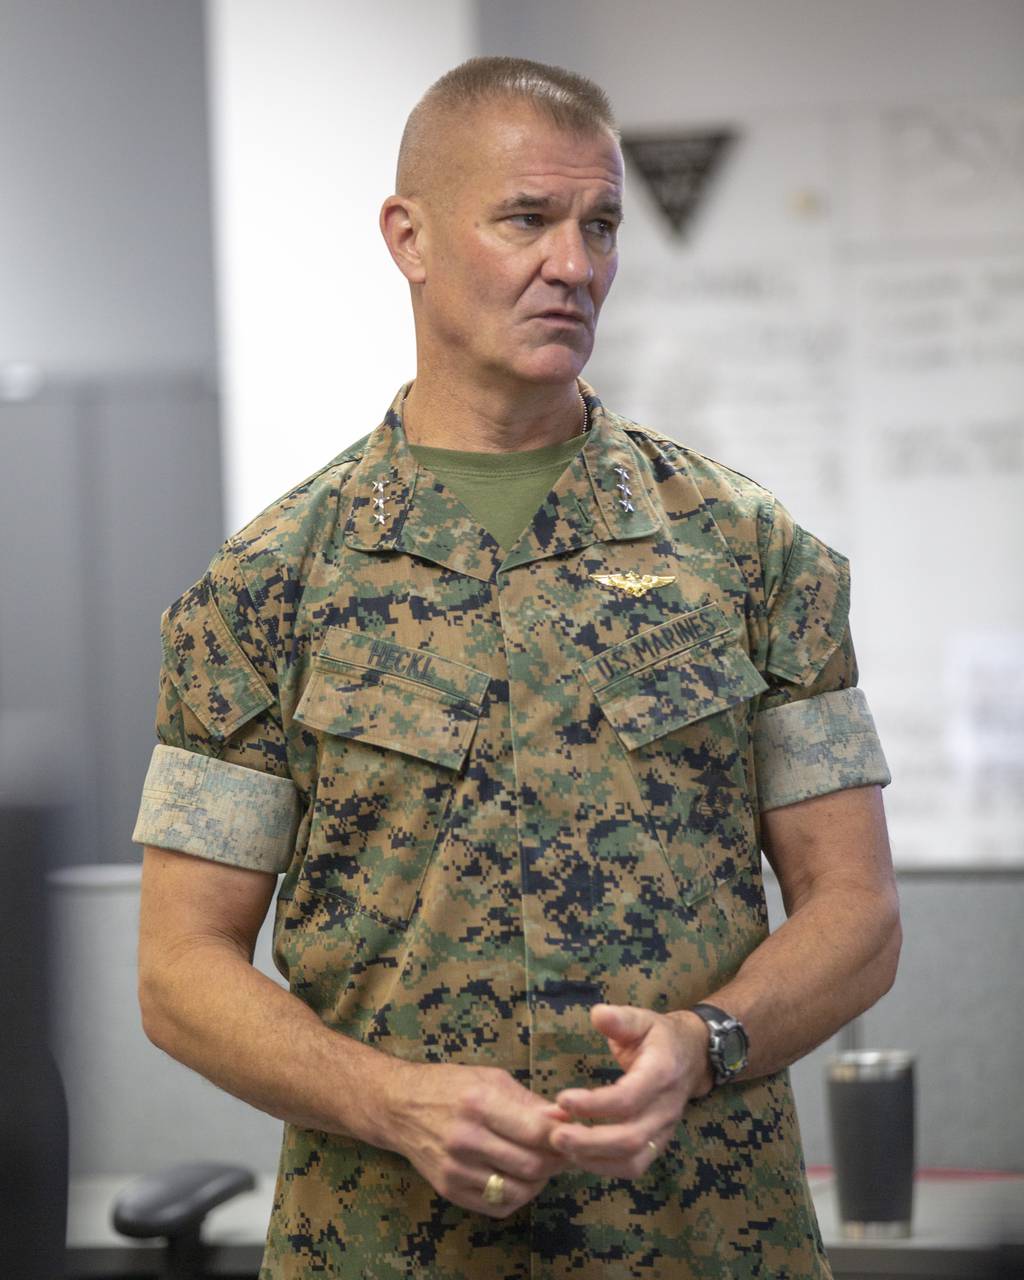 The Marine Corps is not moving fast enough to face China, general says